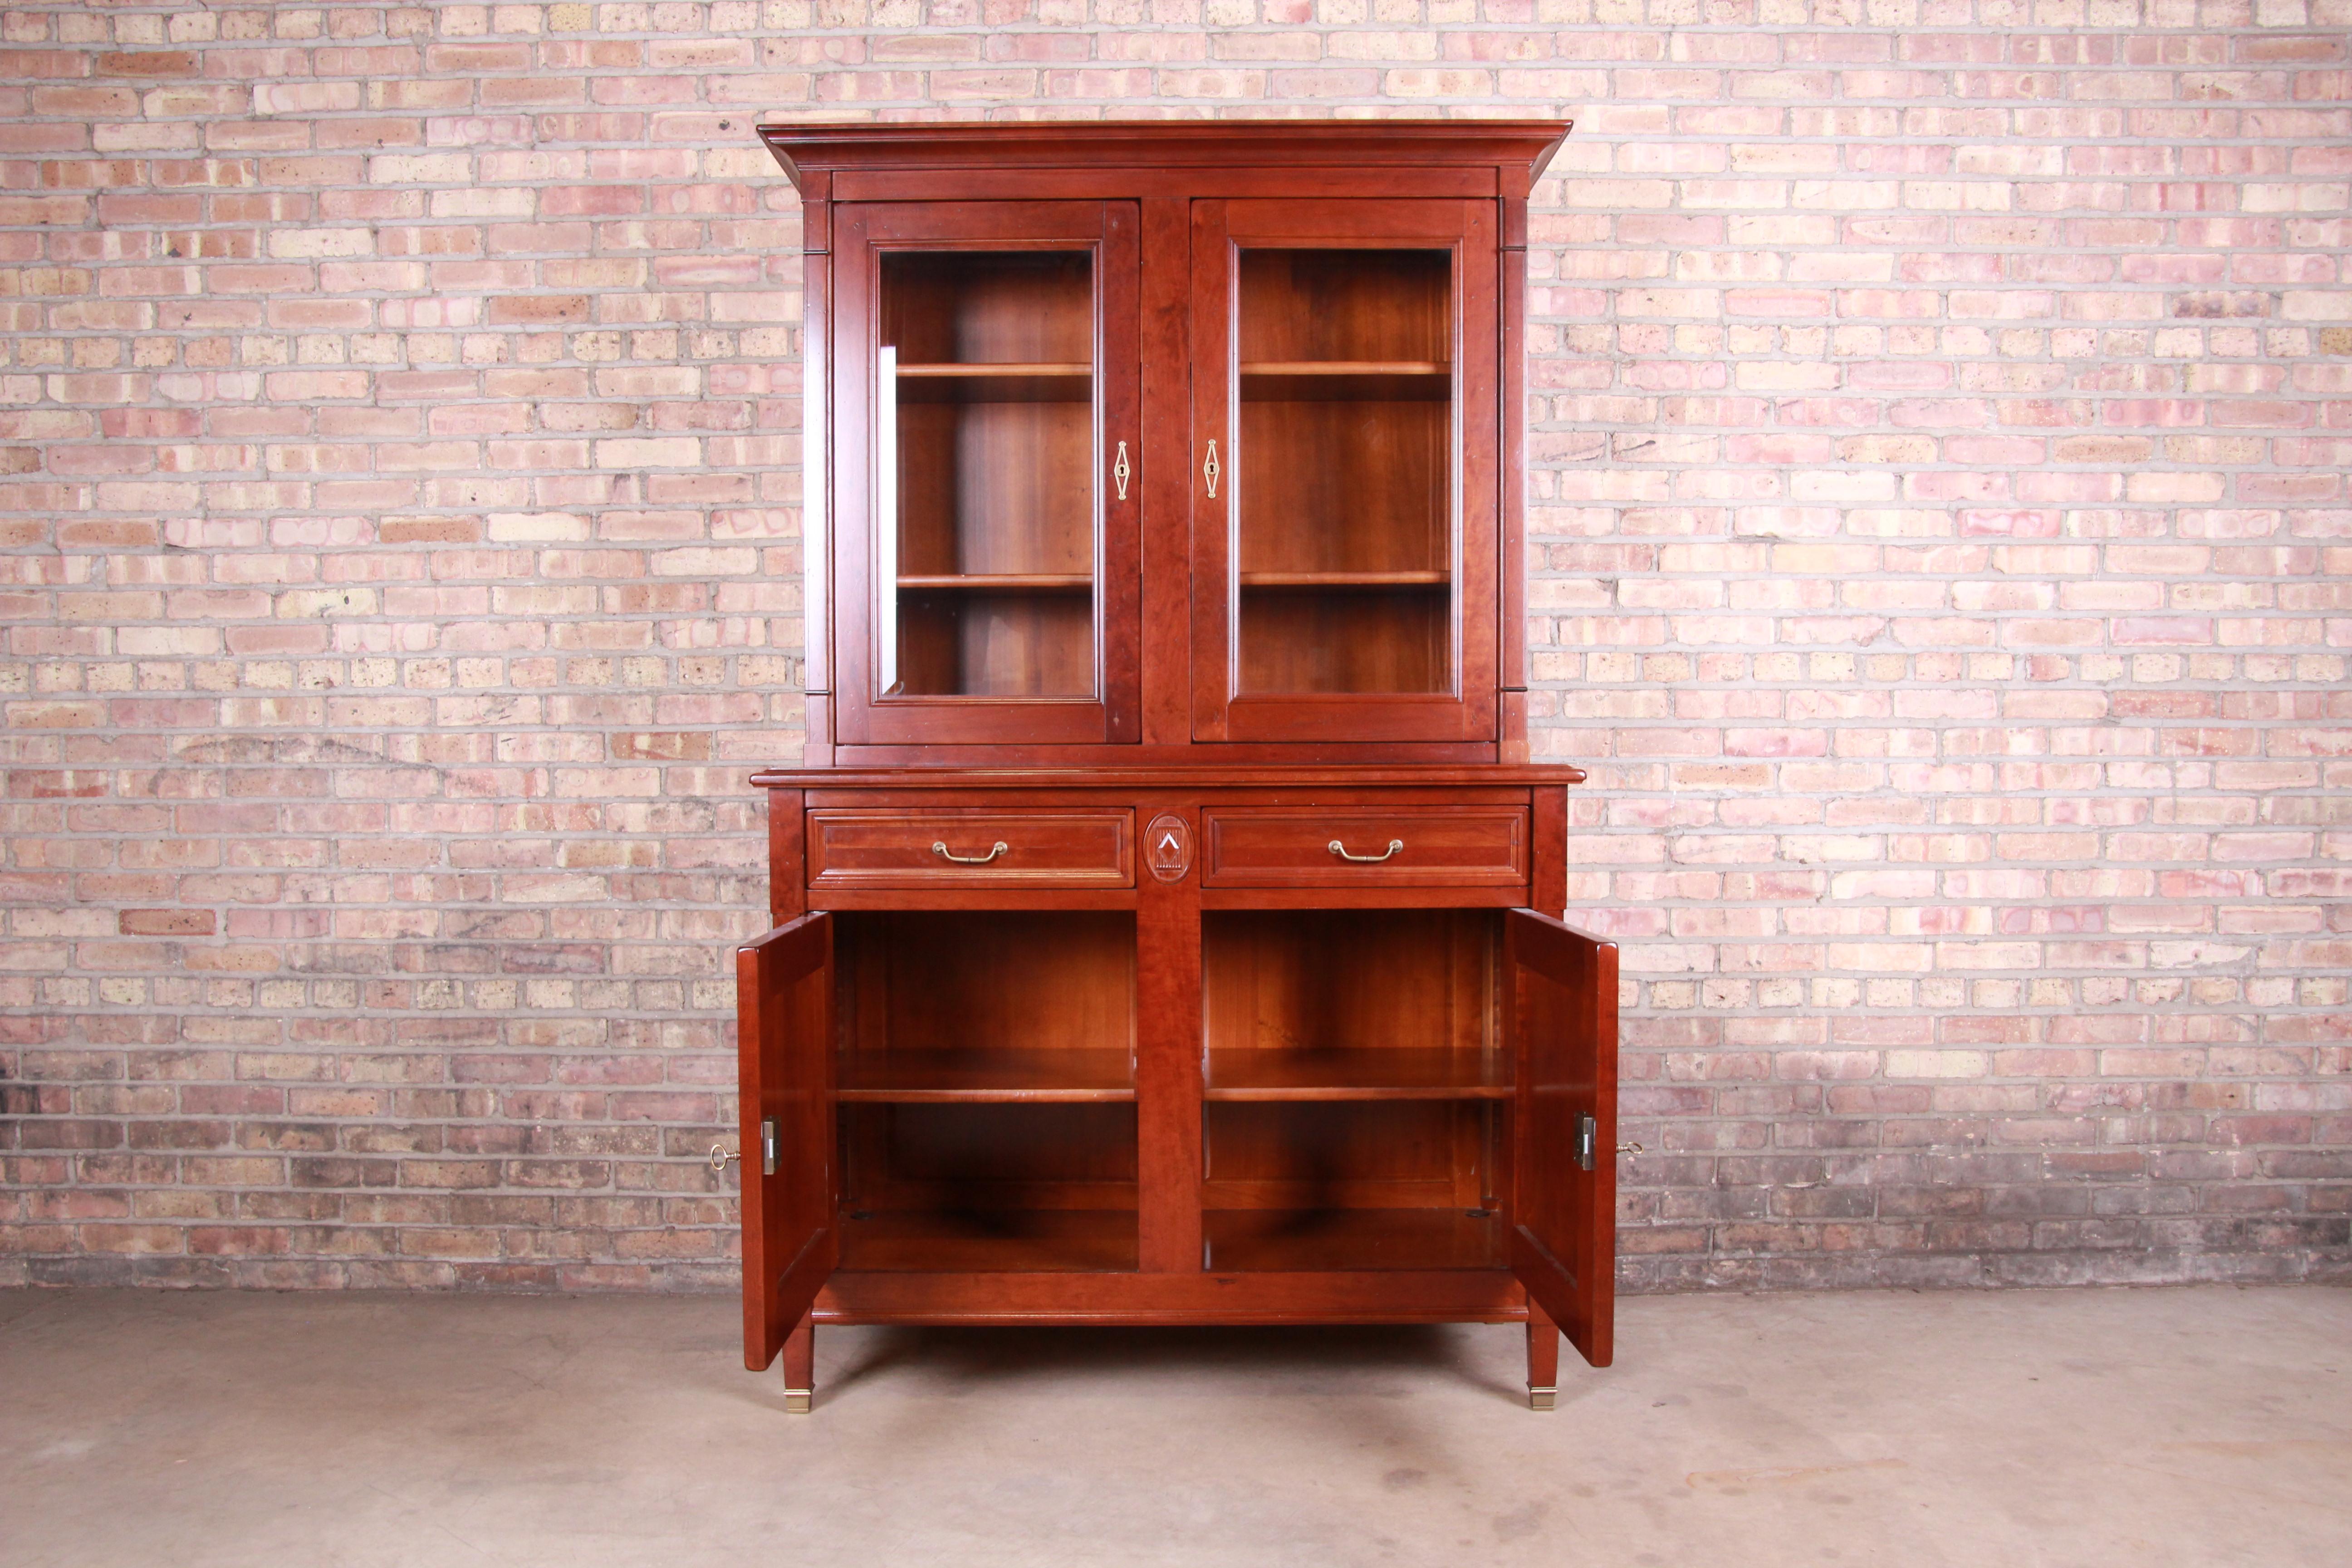 French Provincial Solid Cherry Breakfront Bookcase or Bar Cabinet by Grange 6